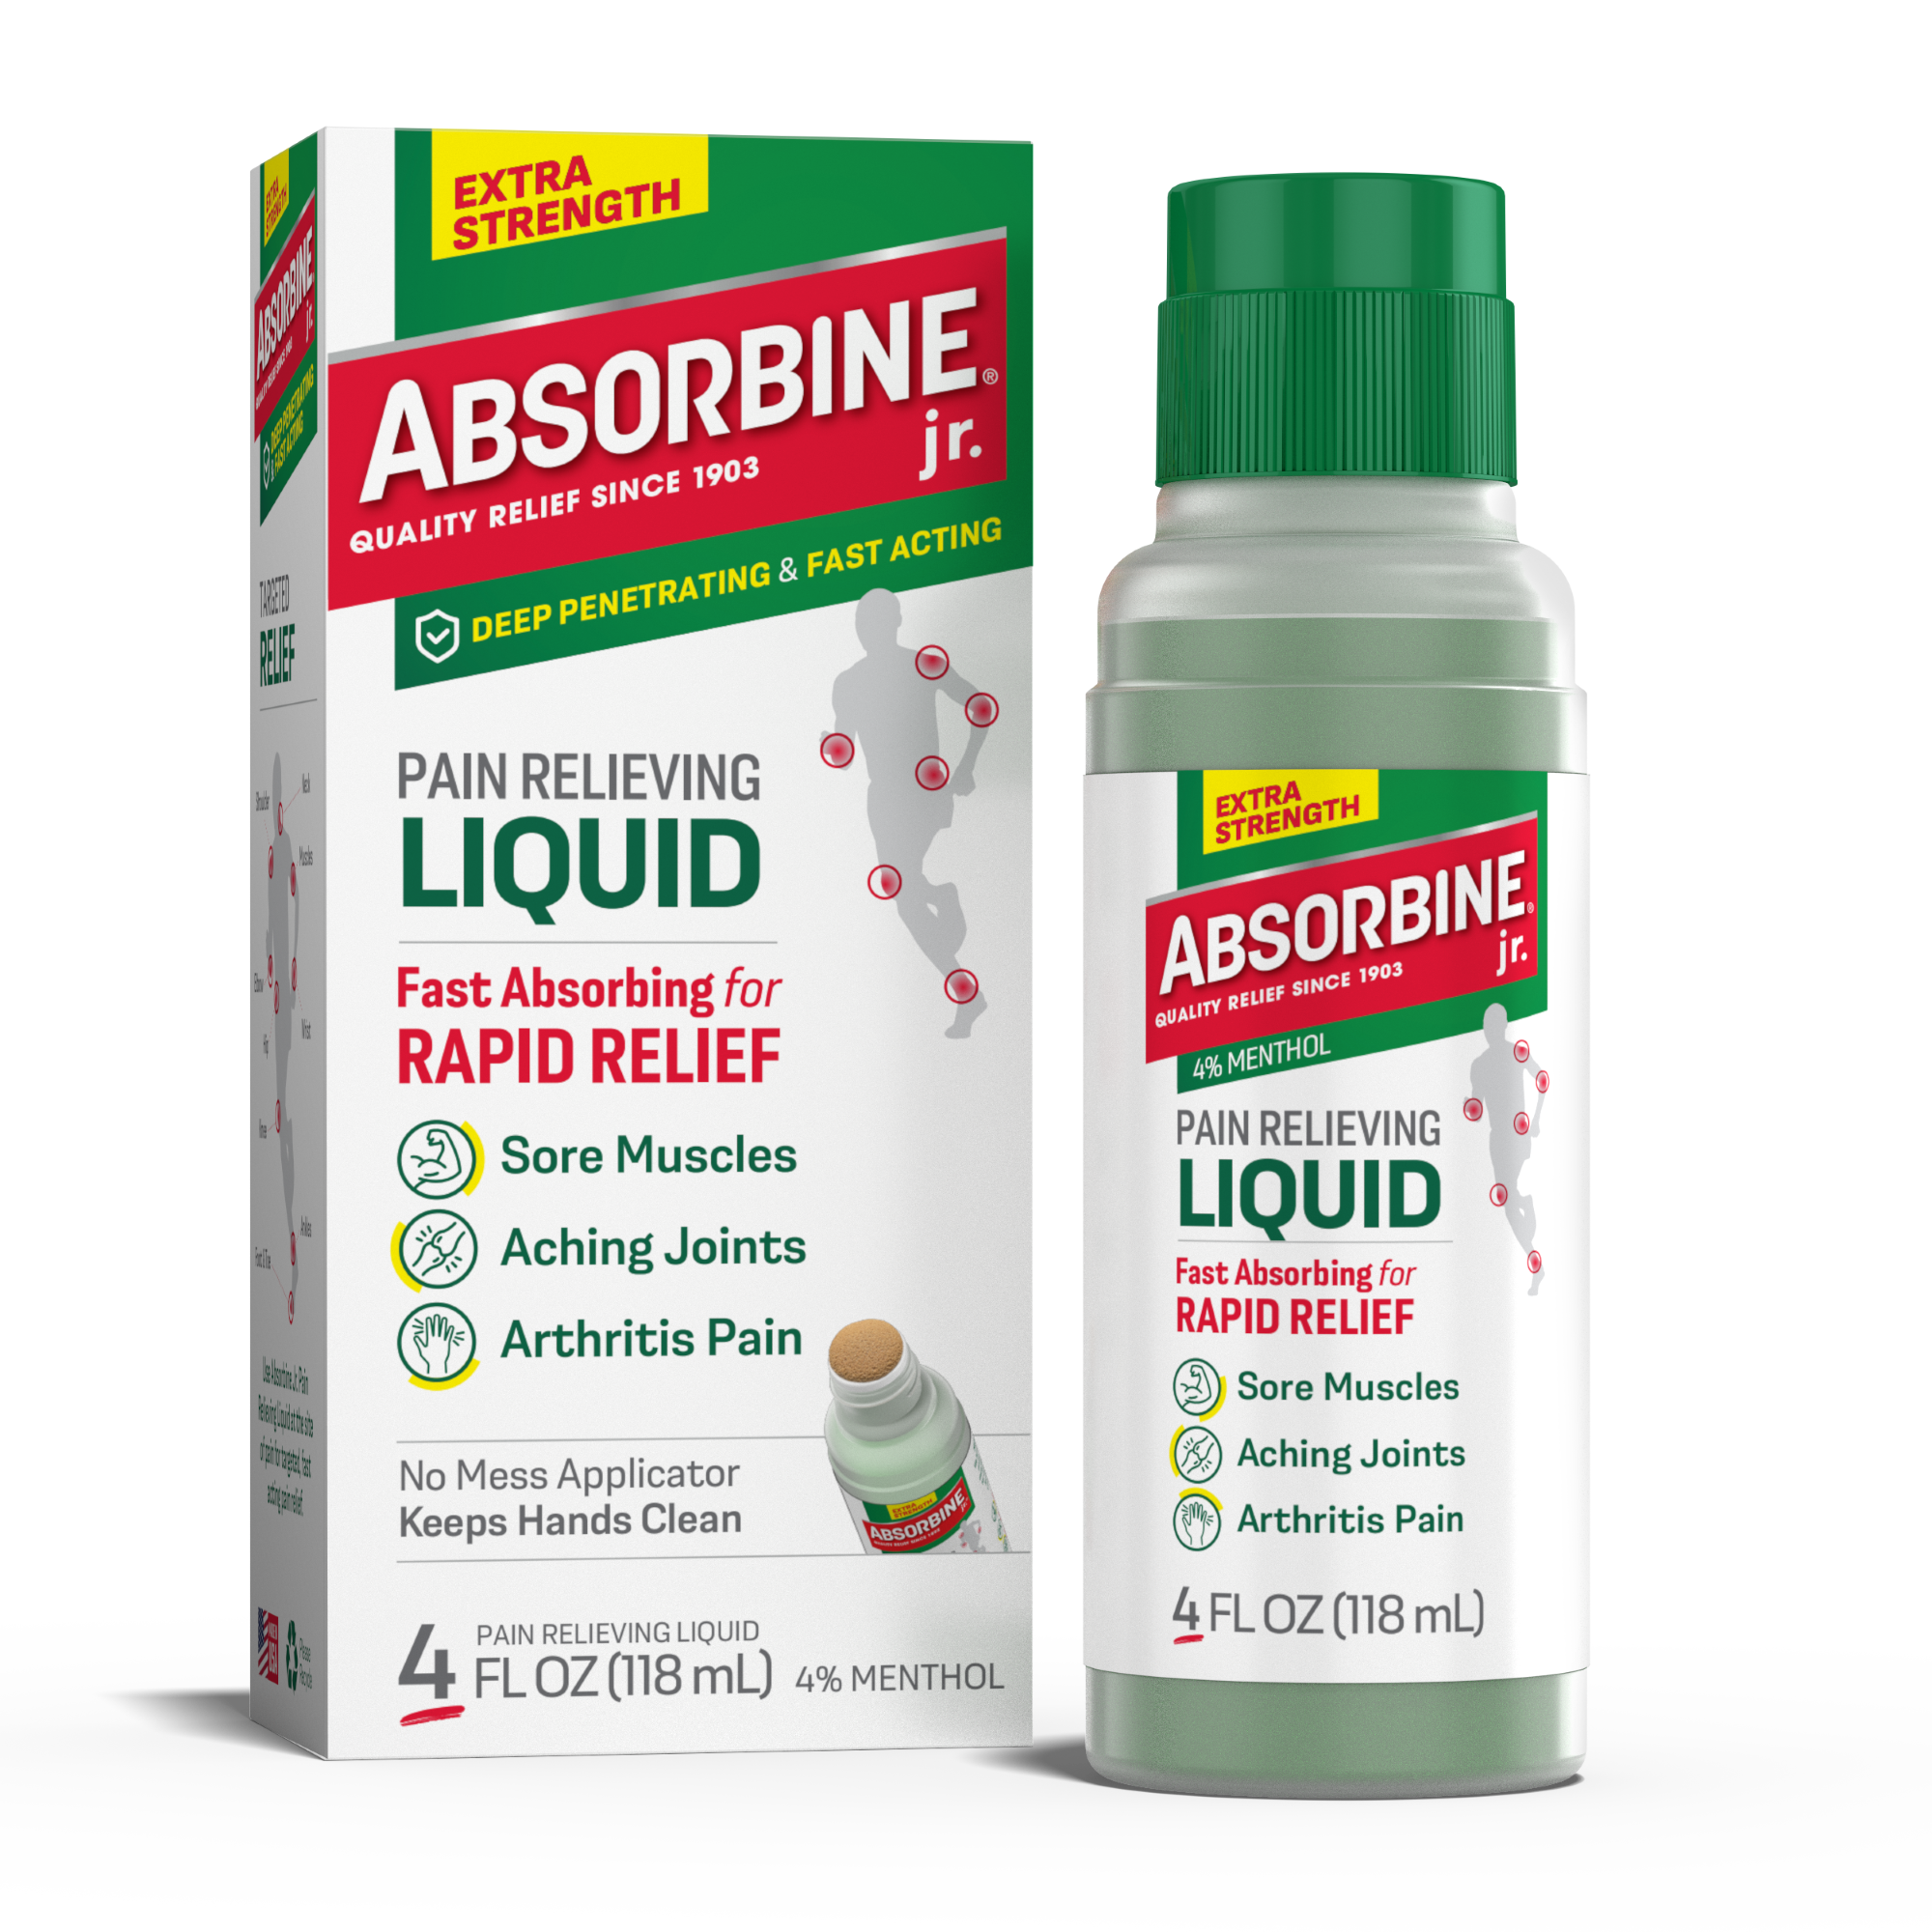 Absorbine Jr. Pain Relieving Liquid with Menthol for Sore Muscles, Joint Aches and Arthritis Pain Relief, 4oz - image 1 of 8